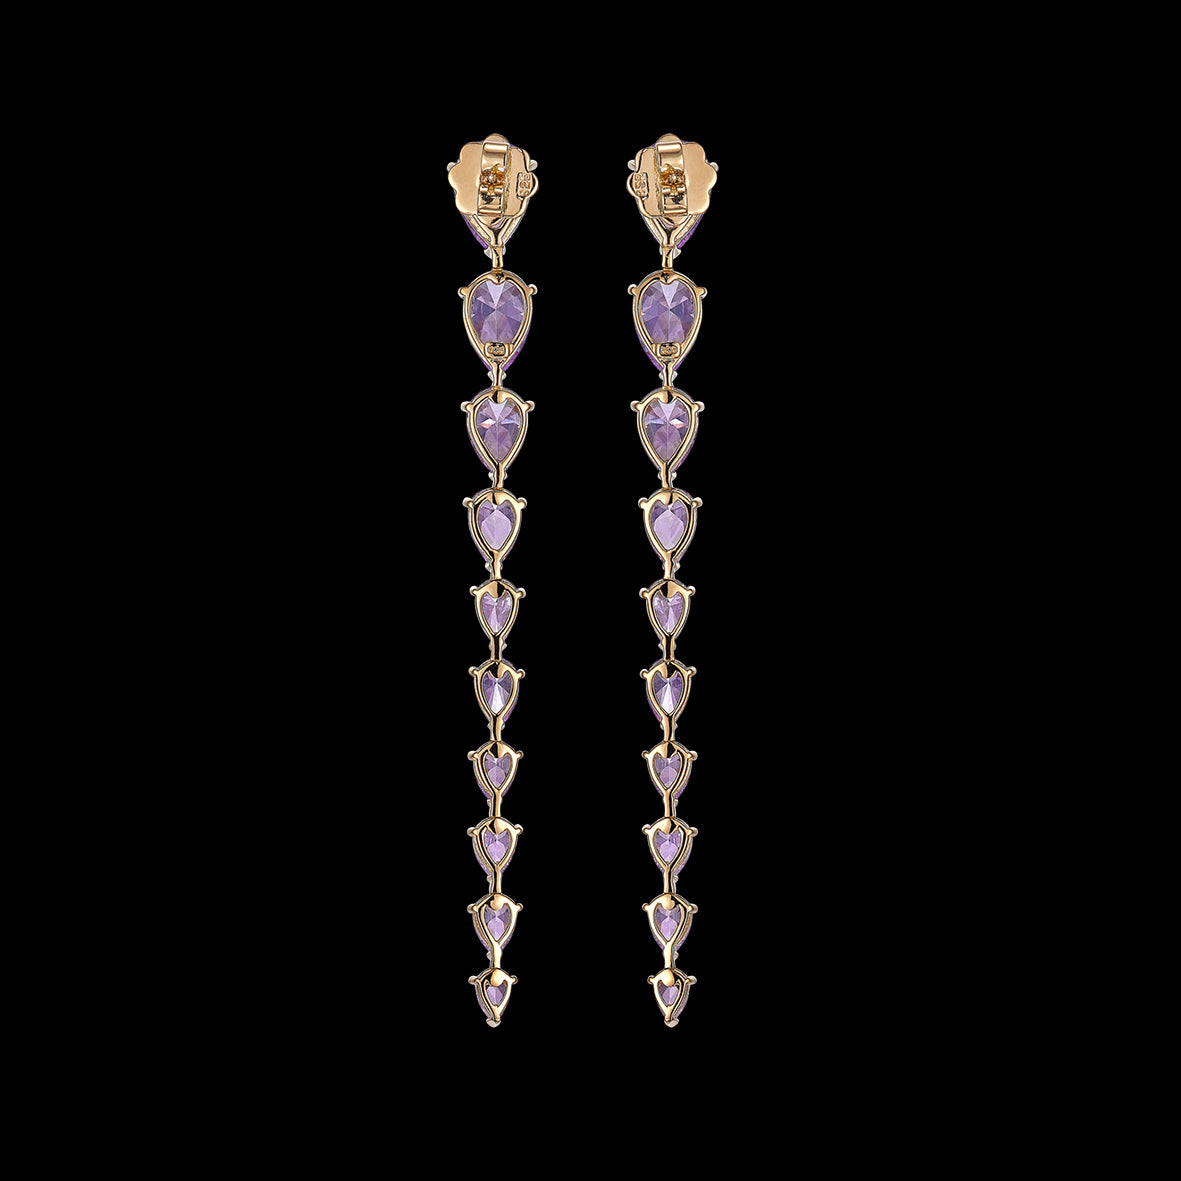 Lilac Nova Earrings, Earrings, Anabela Chan Joaillerie - Fine jewelry with laboratory grown and created gemstones hand-crafted in the United Kingdom. Anabela Chan Joaillerie is the first fine jewellery brand in the world to champion laboratory-grown and created gemstones with high jewellery design, artisanal craftsmanship and a focus on ethical and sustainable innovations.